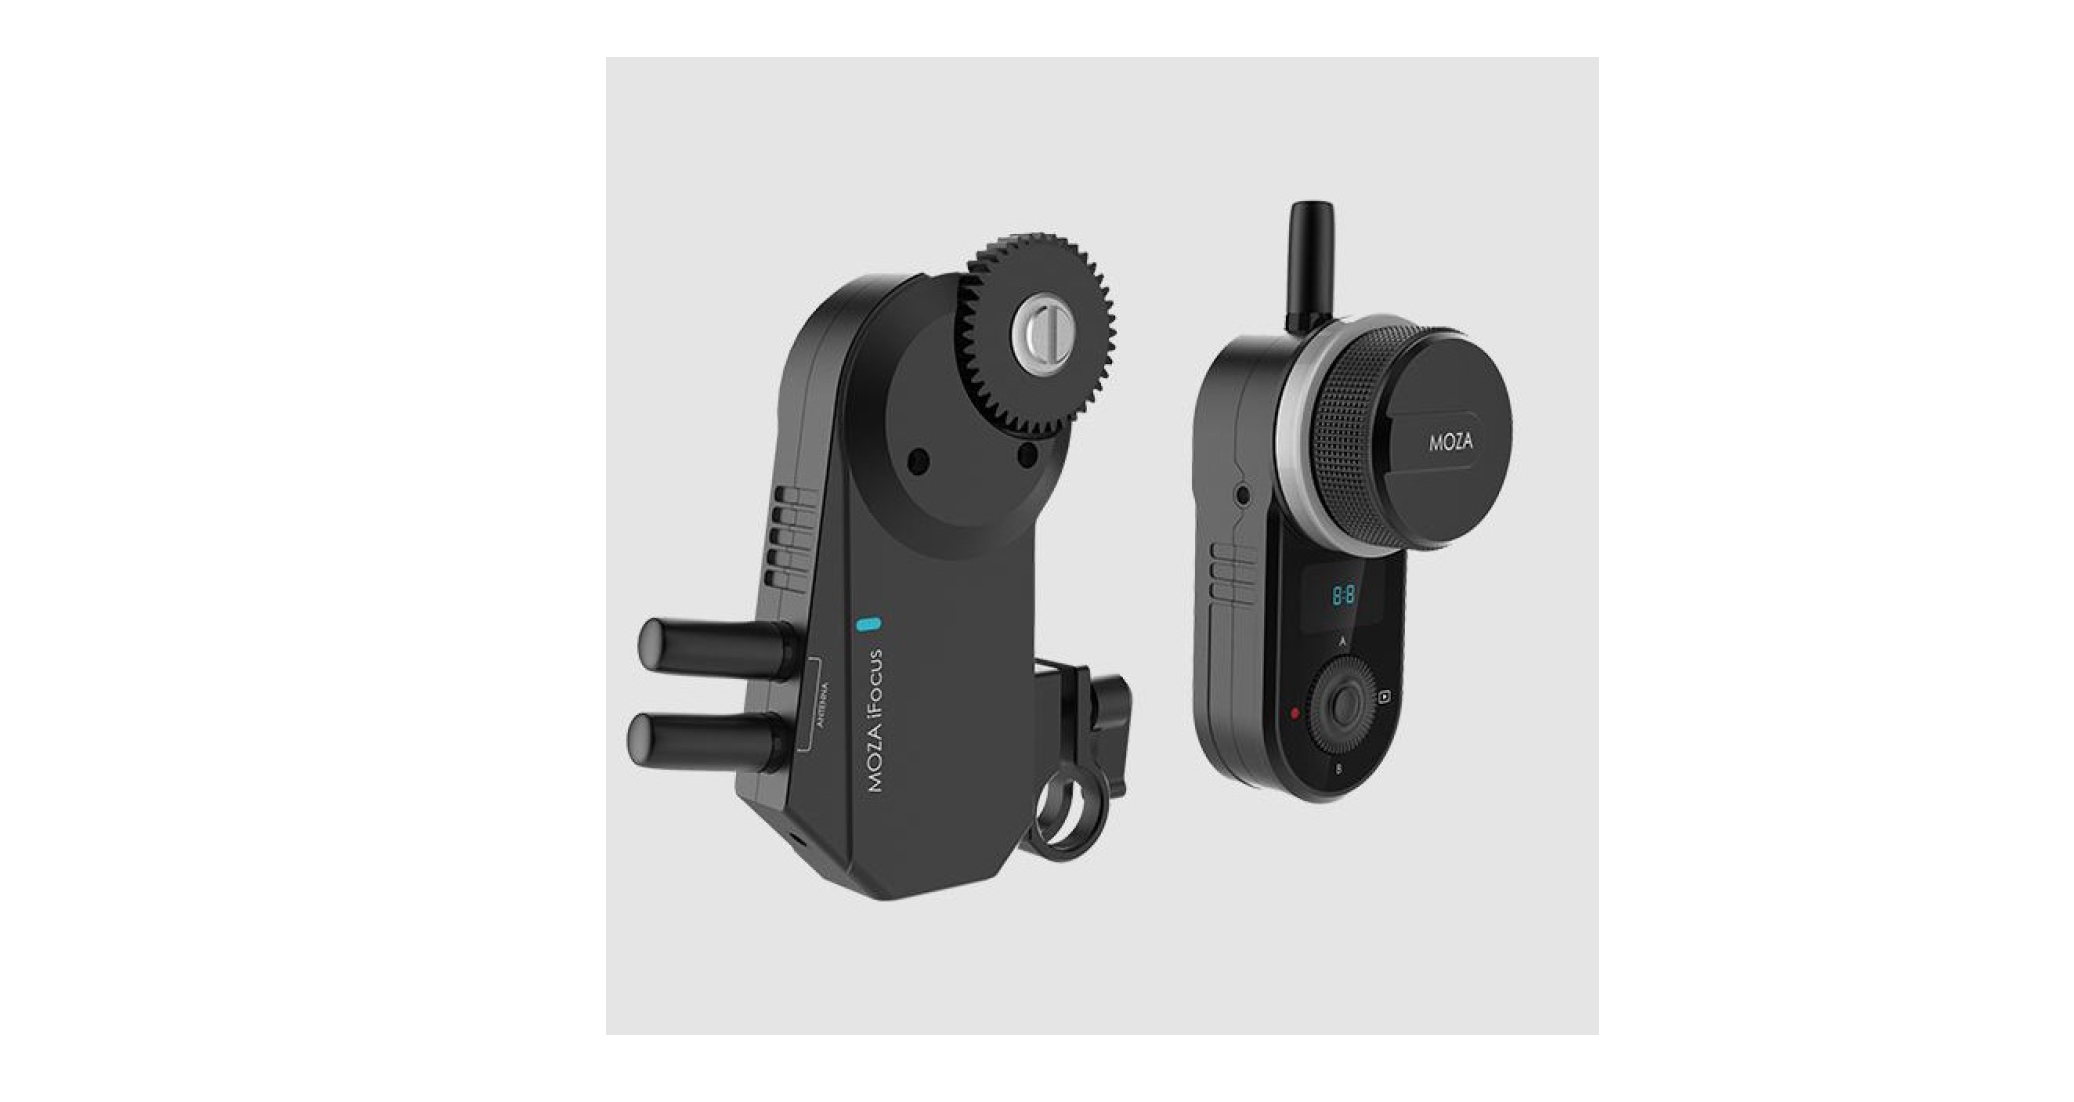 13 accessories for the MOZA 2 Handheld Gimbal - Newsshooter